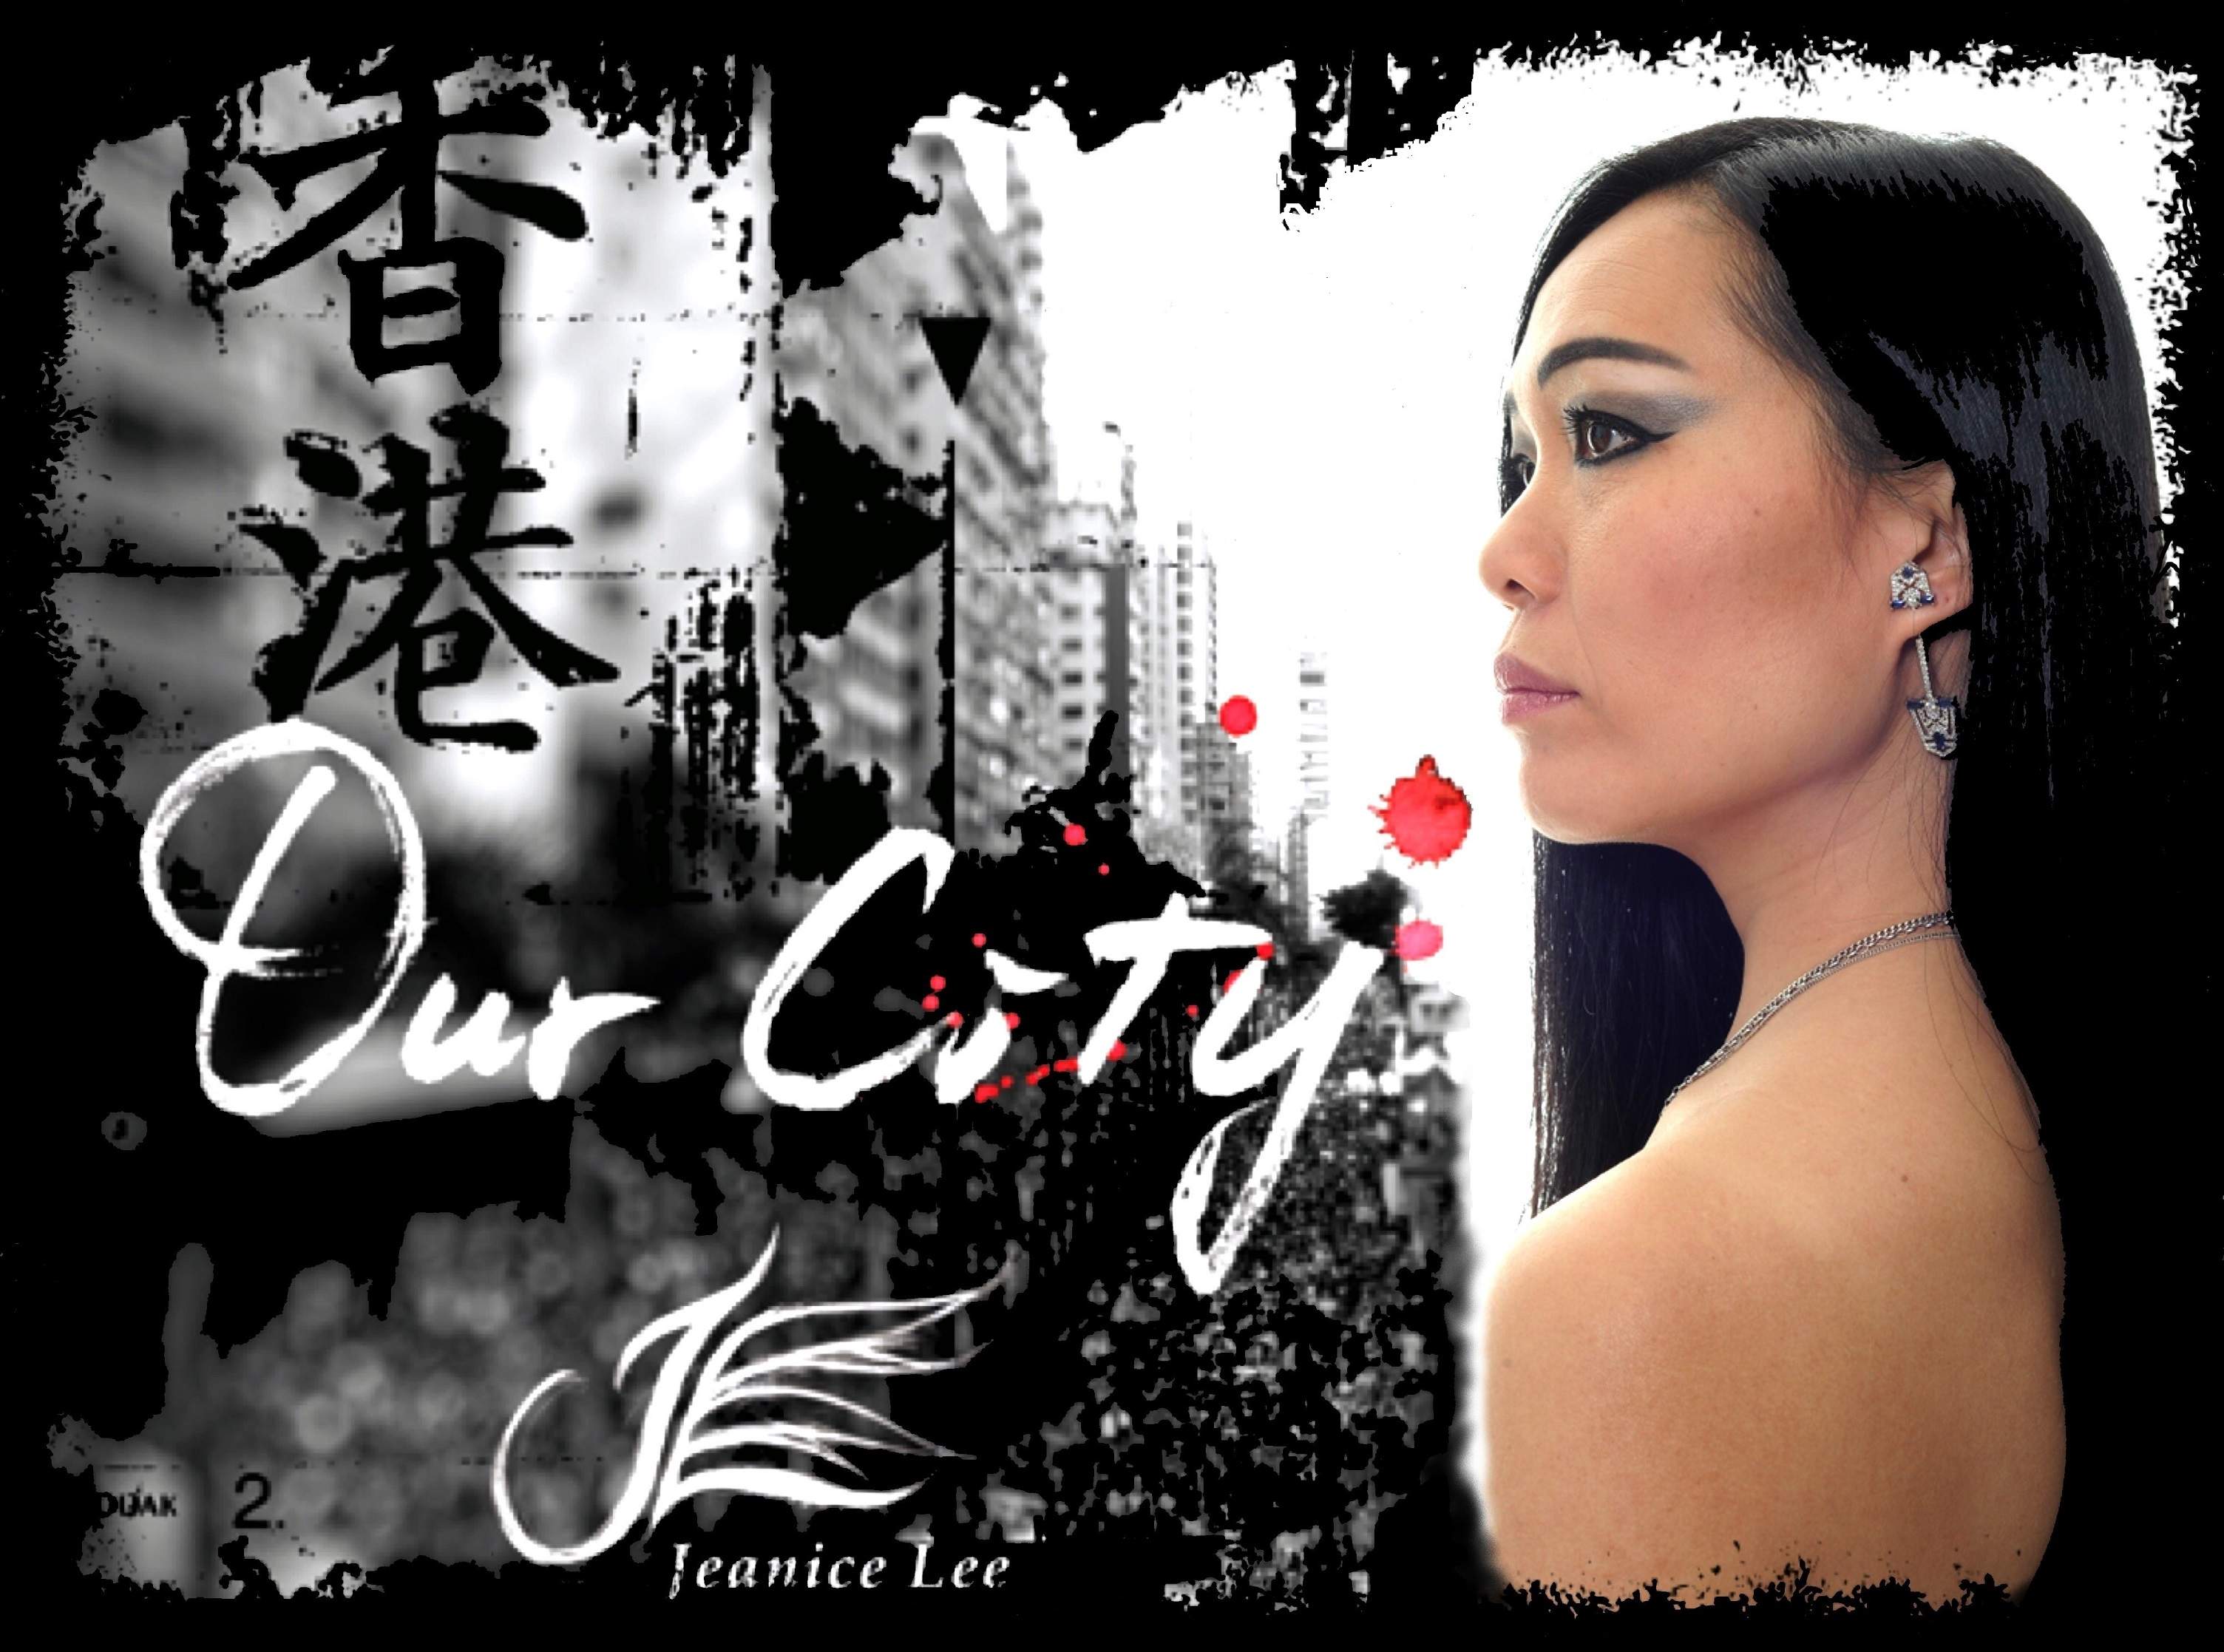 Our City - CD (single)